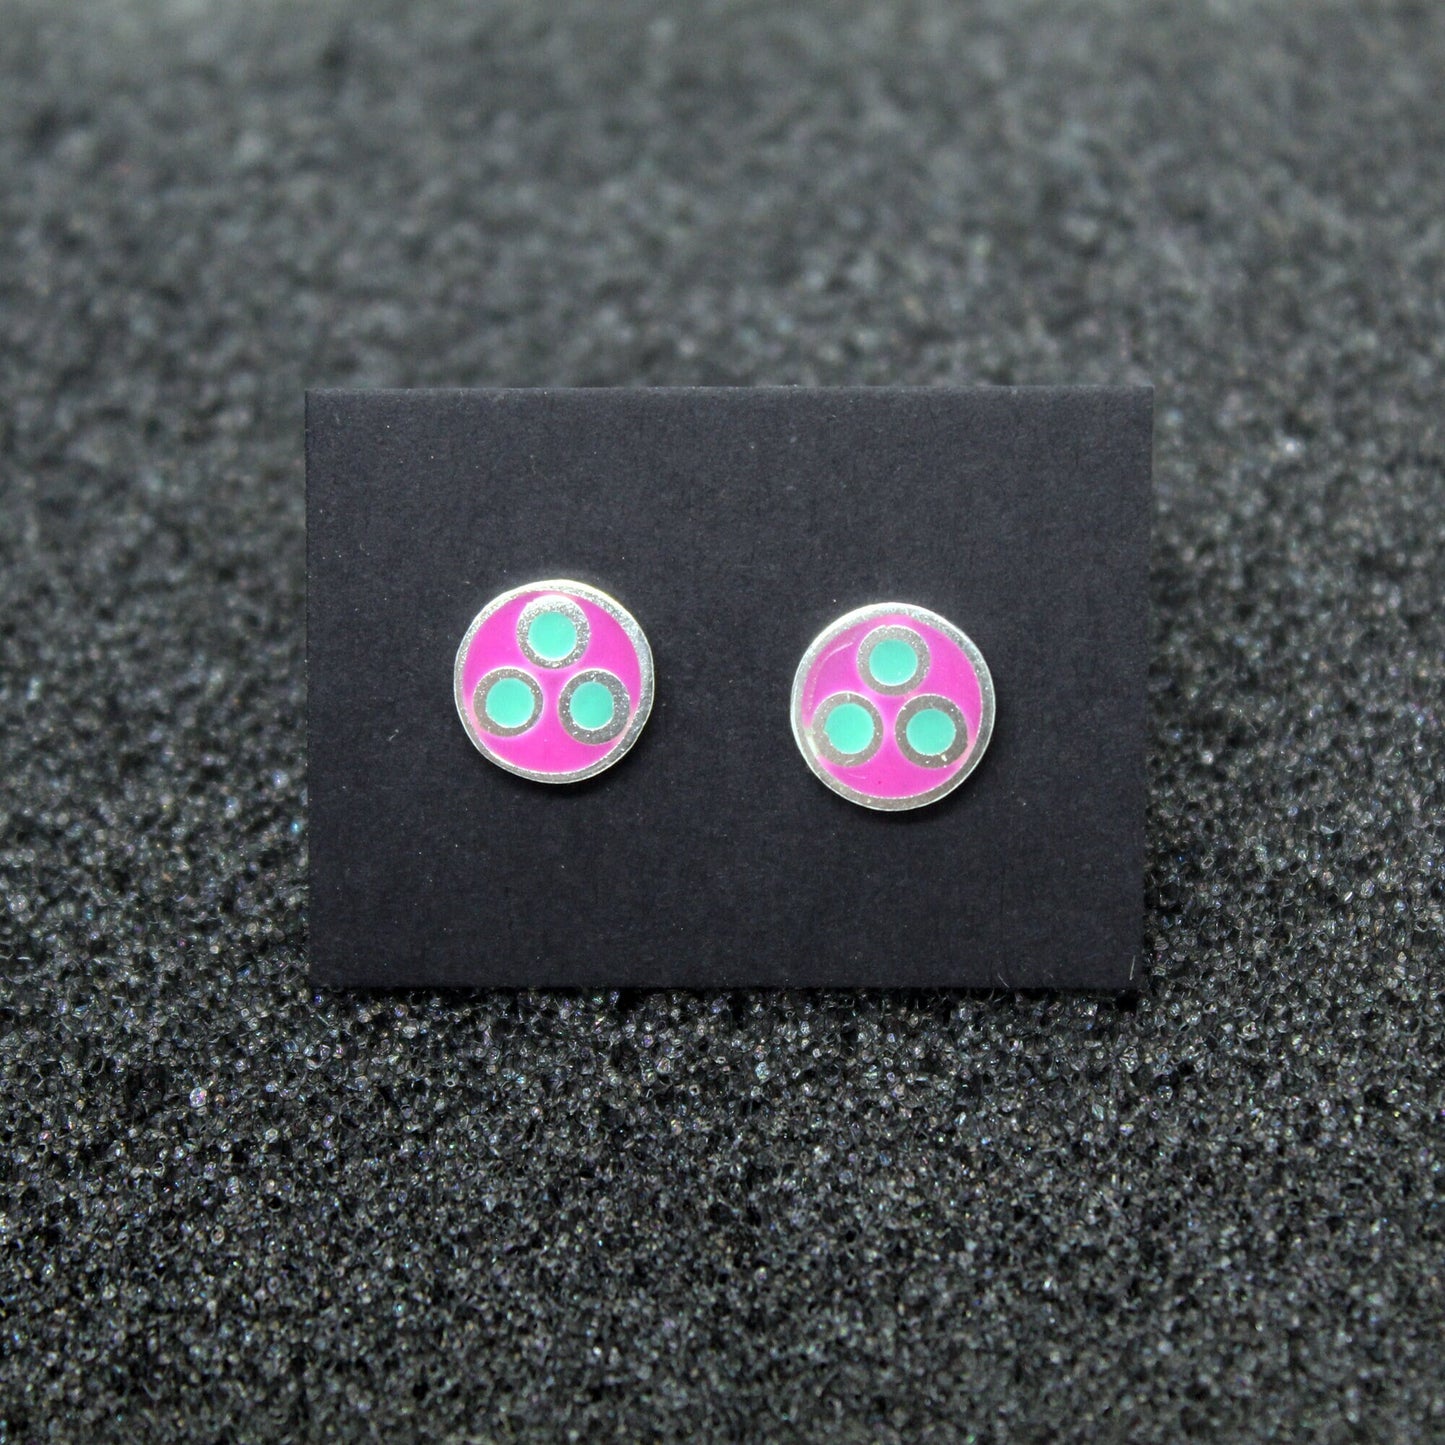 Small colored earrings in 925 silver